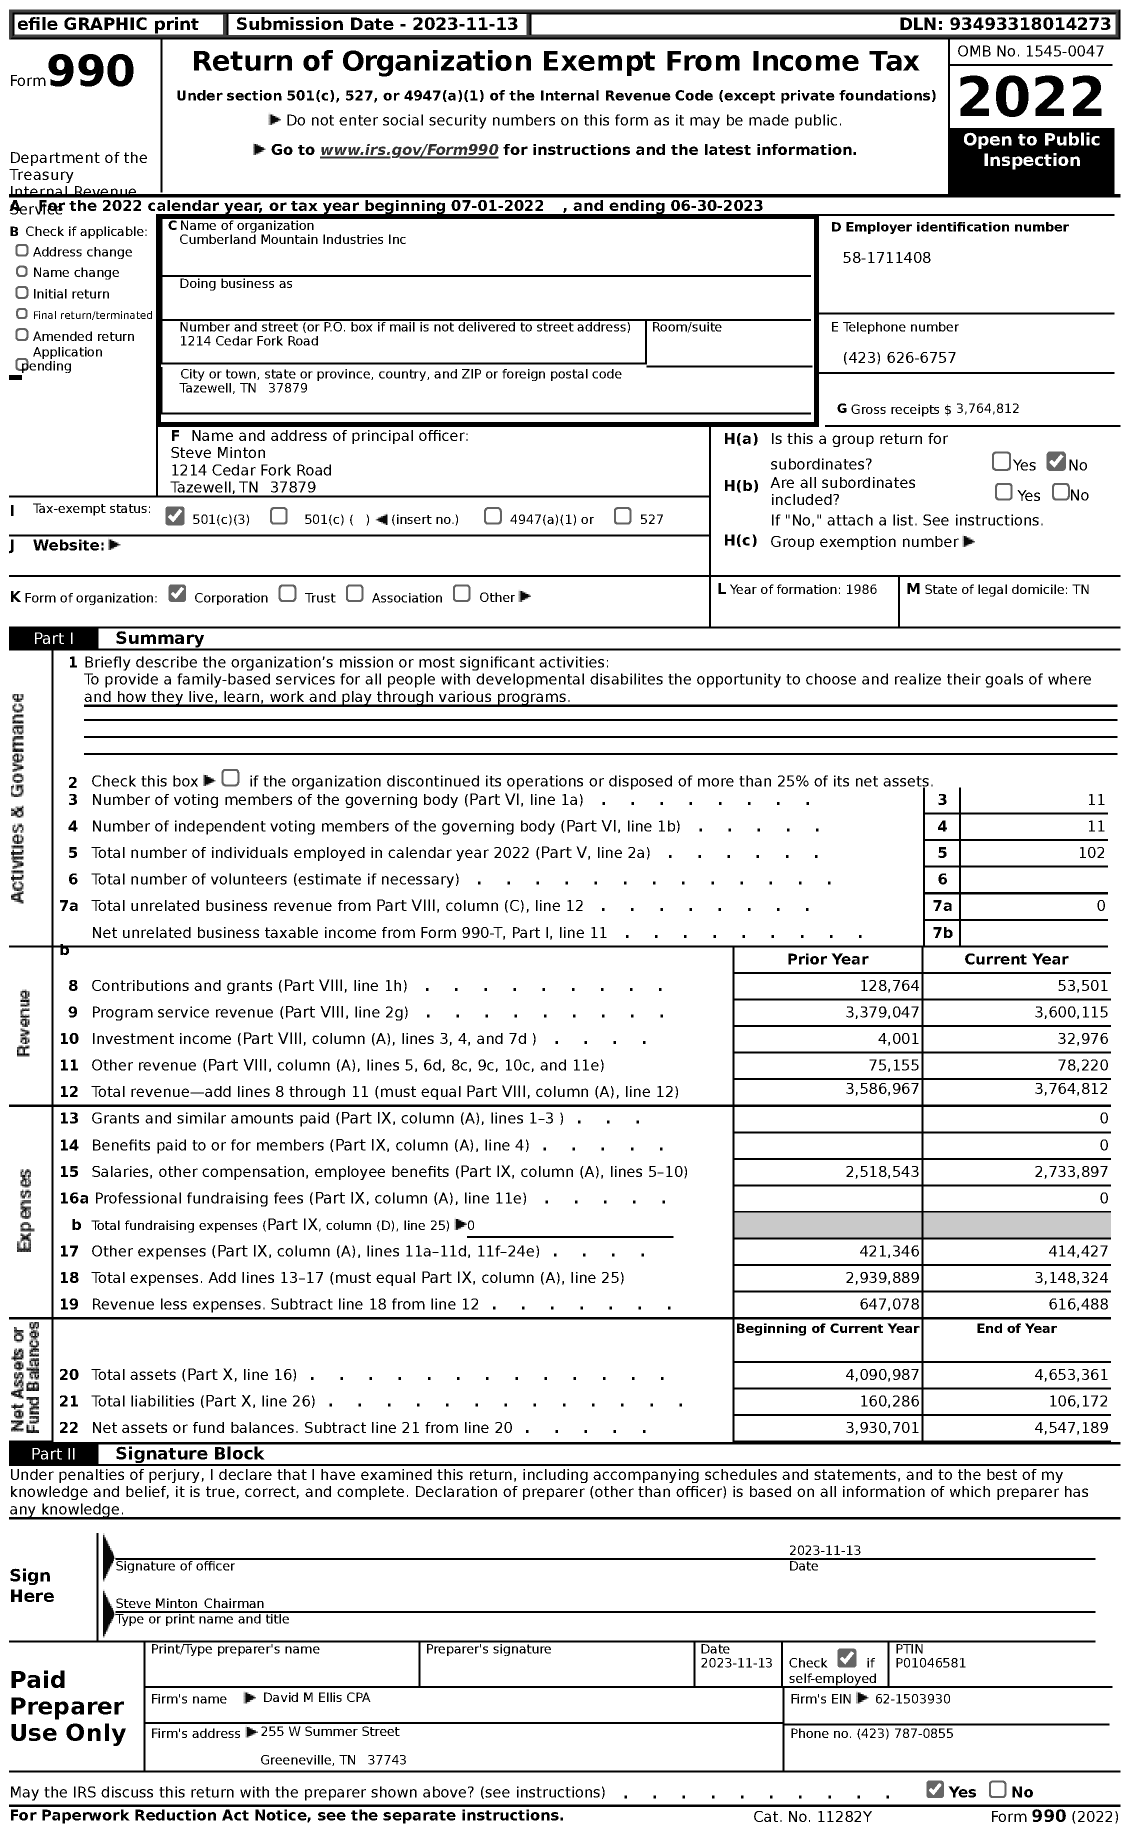 Image of first page of 2022 Form 990 for Cumberland Mountain Industries